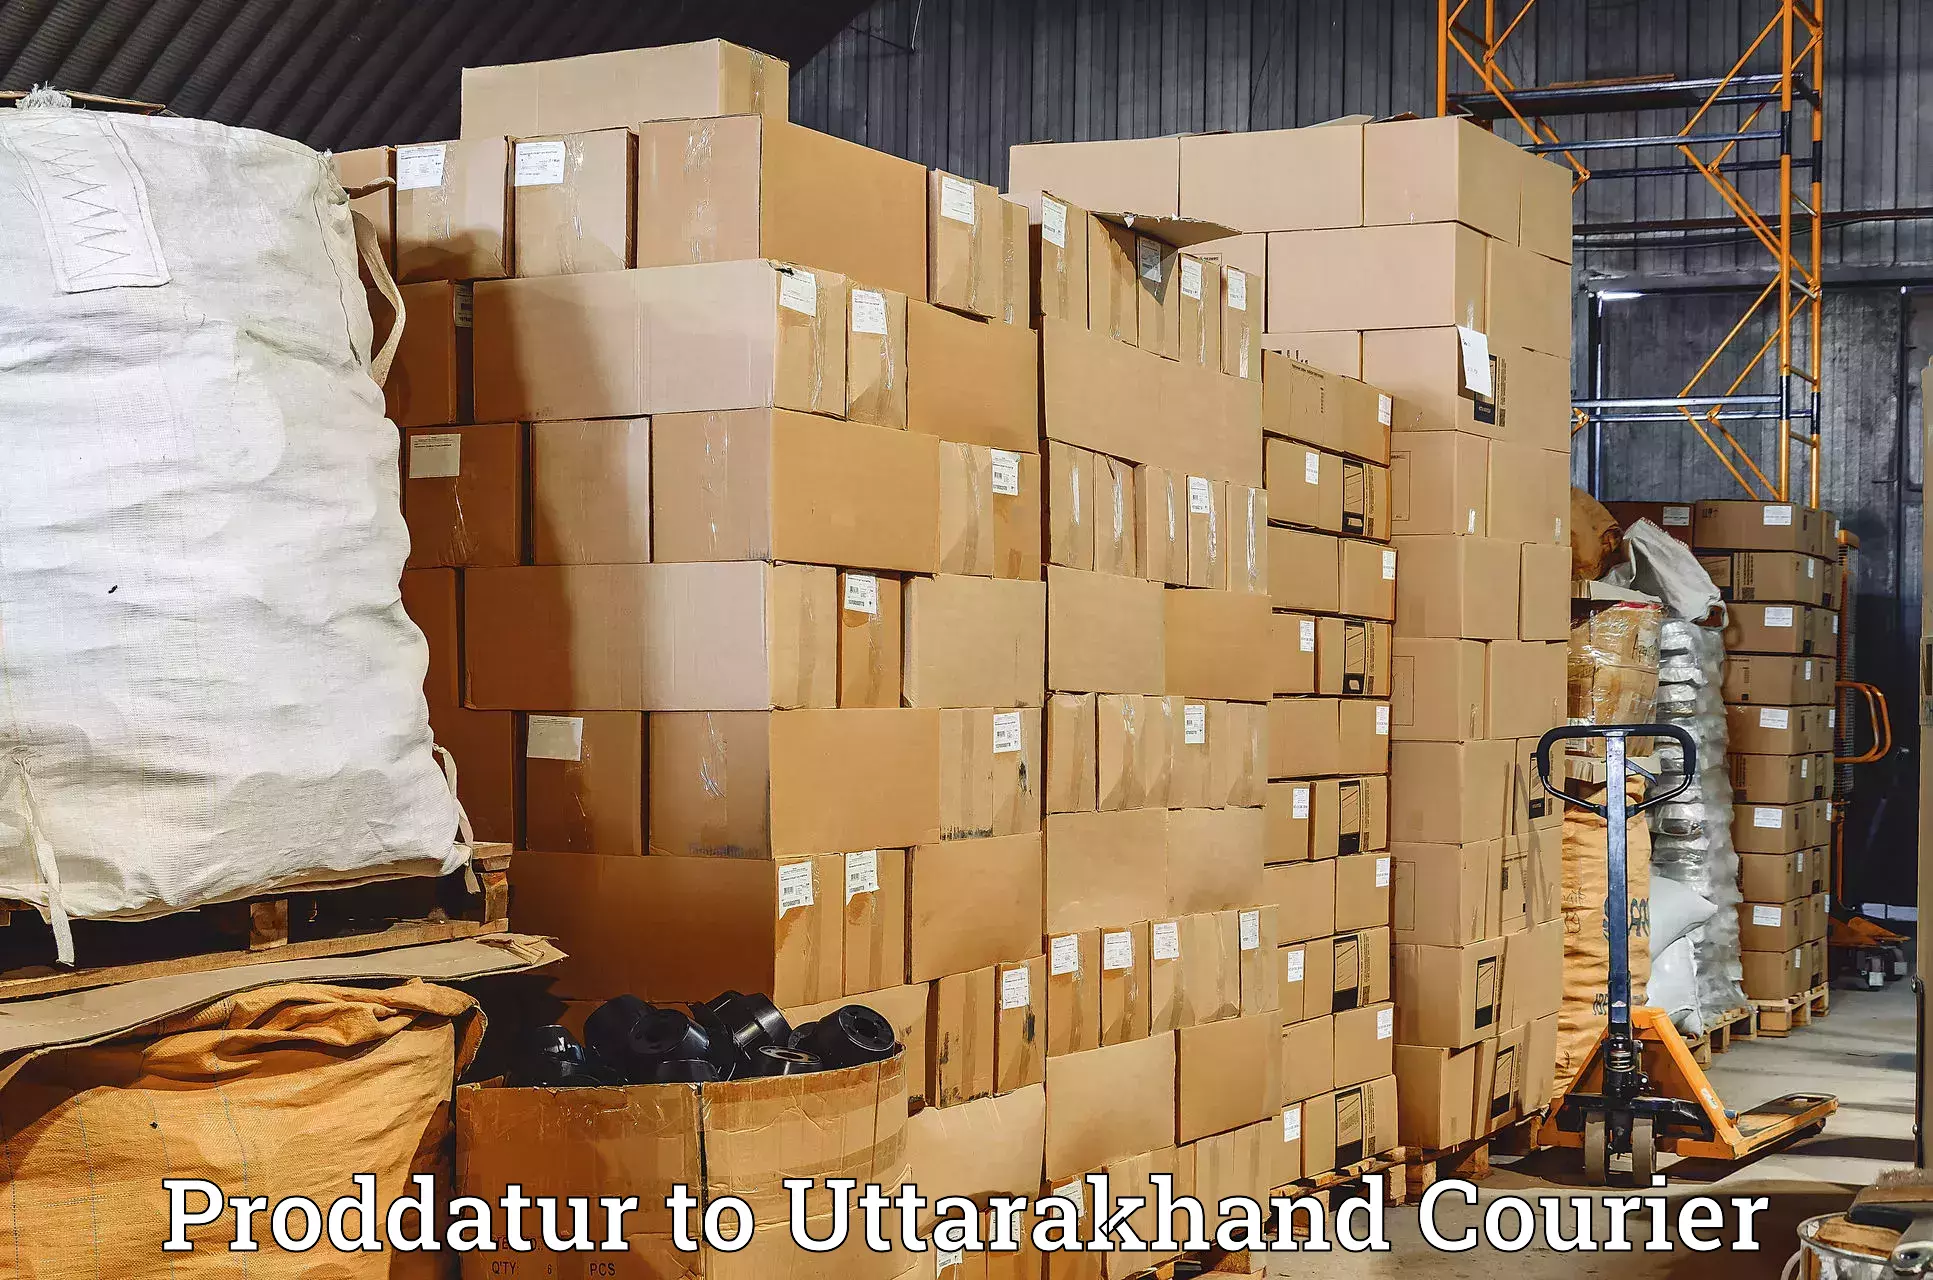 Postal and courier services Proddatur to Uttarakhand